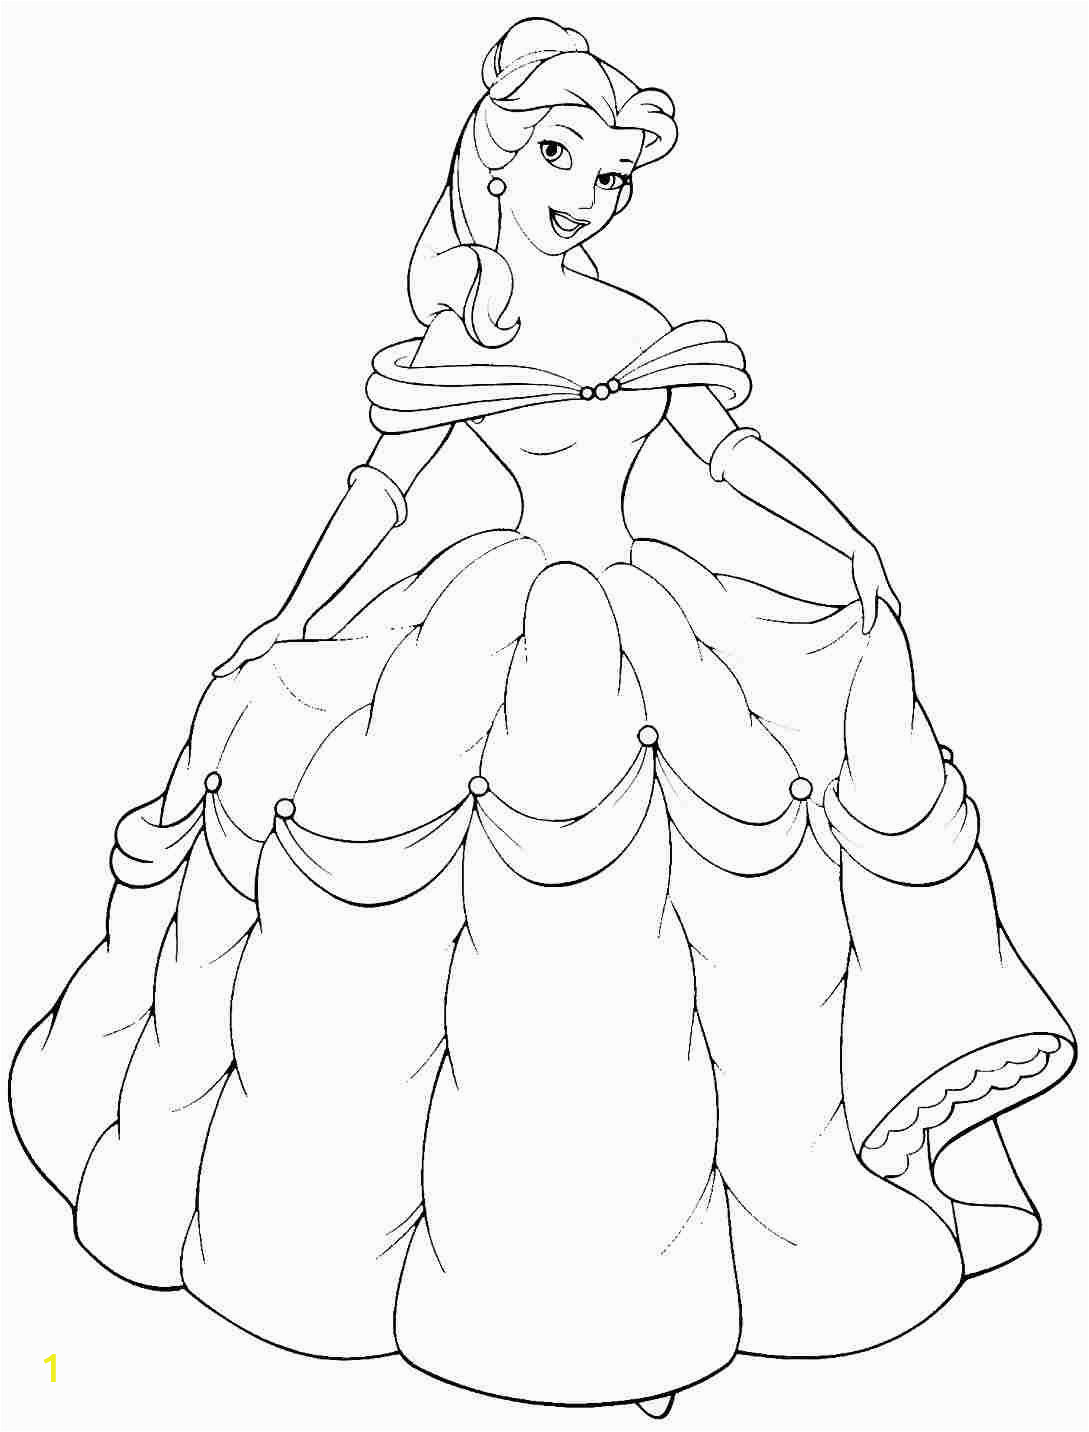 Printing Princess Coloring Pages Free Printable Belle Coloring Pages for Kids